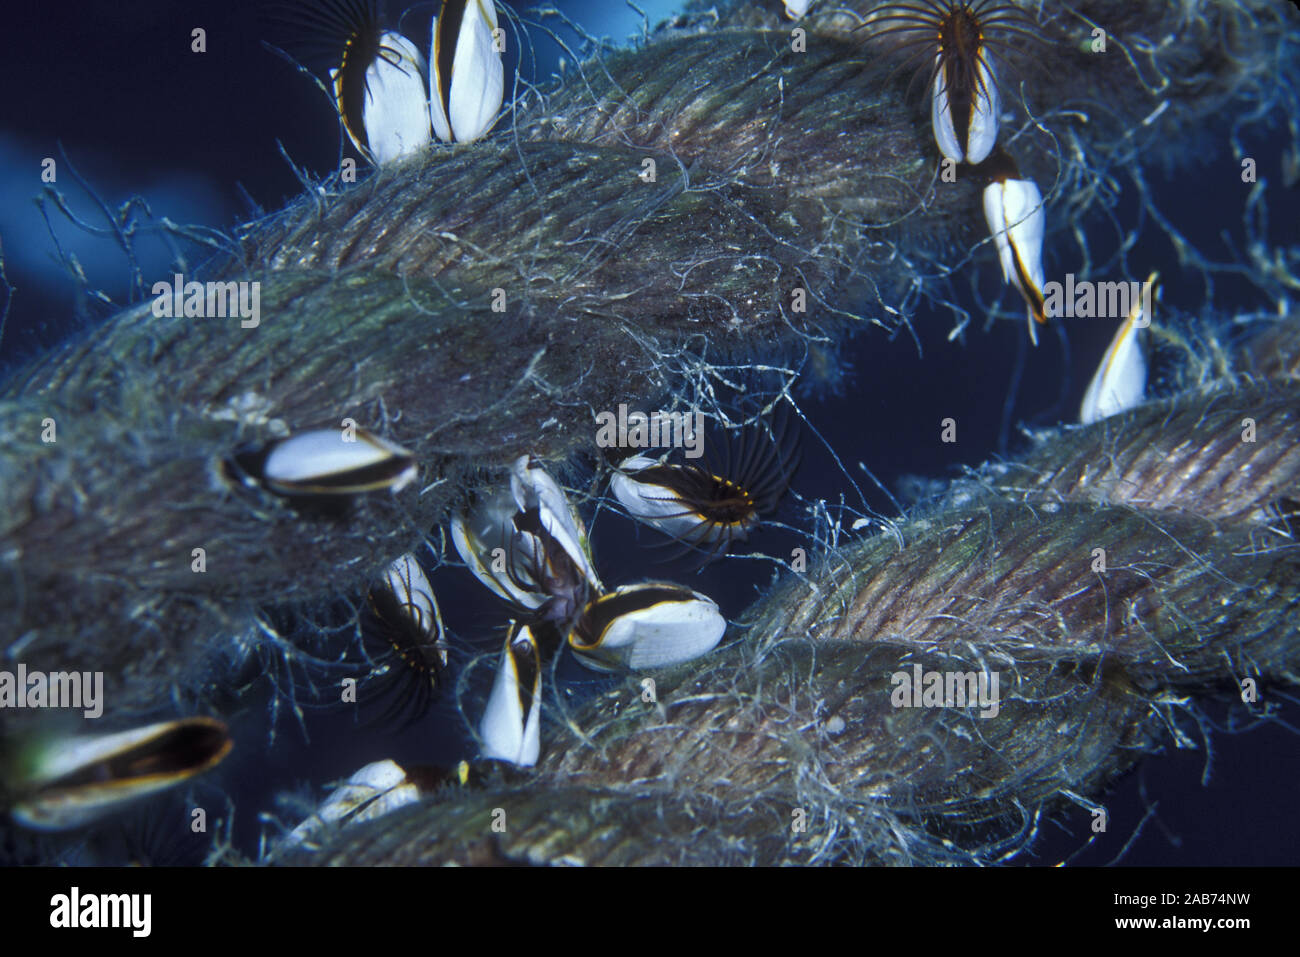 Gooseneck barnacles (Lepas pectinata), on mooring rope. Species usually attaches to floating objects. Coral Sea, Queensland, Australia Stock Photo